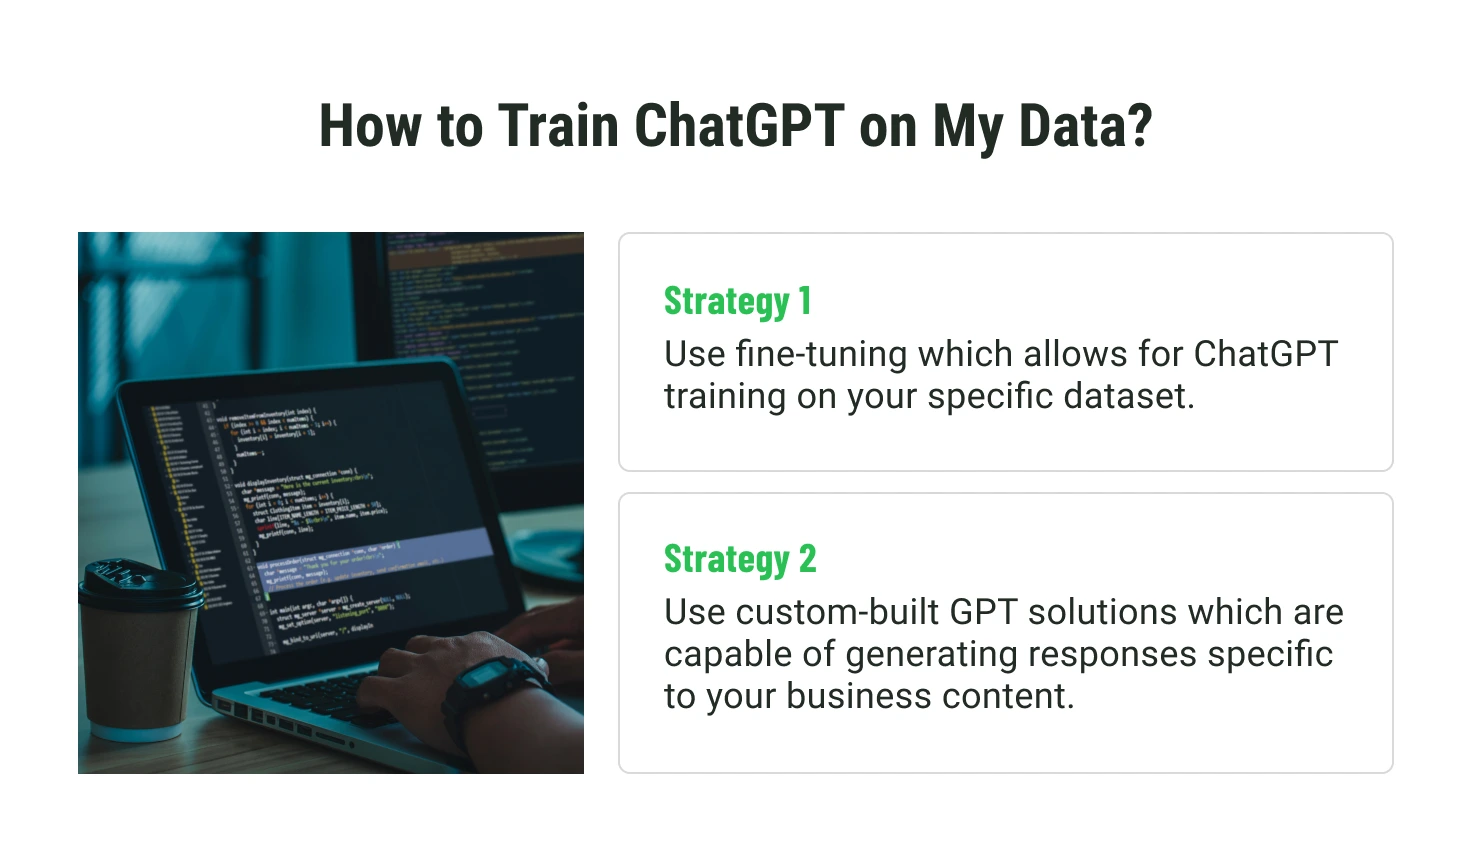 How to train ChatGPT on my data?